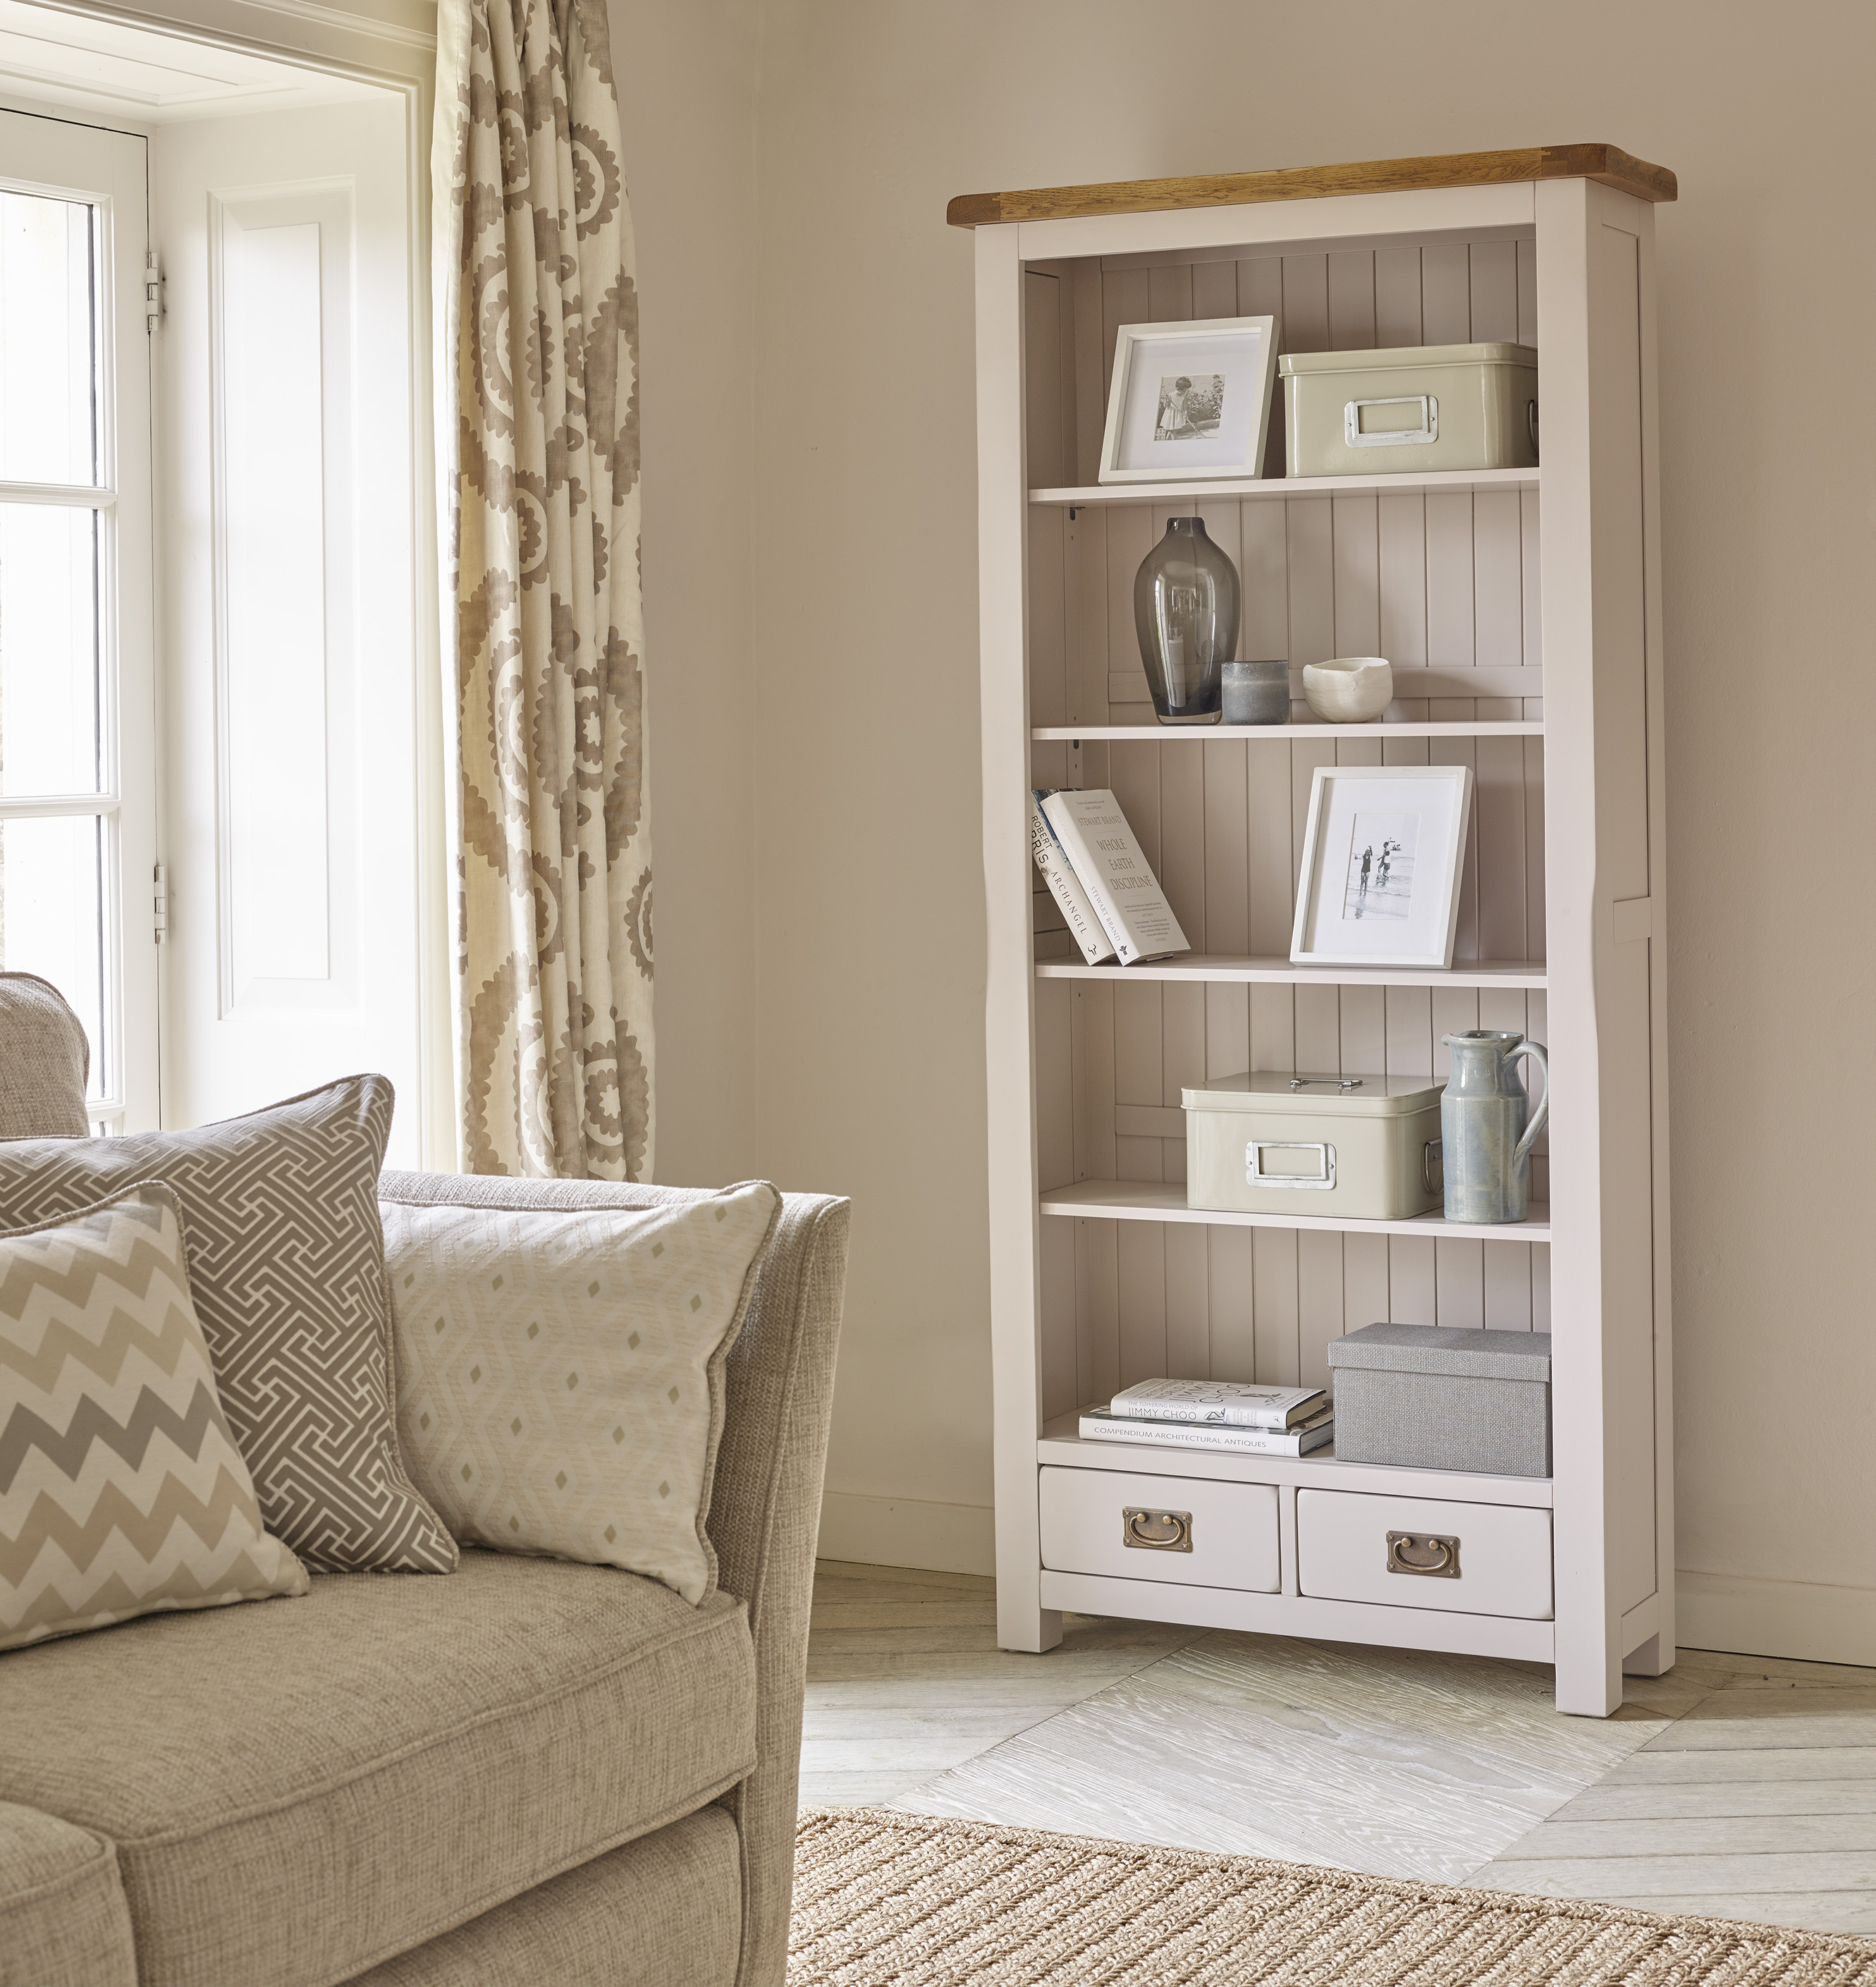 How To Creatively Style Your Bookshelves The Oak Furniture Land Blog